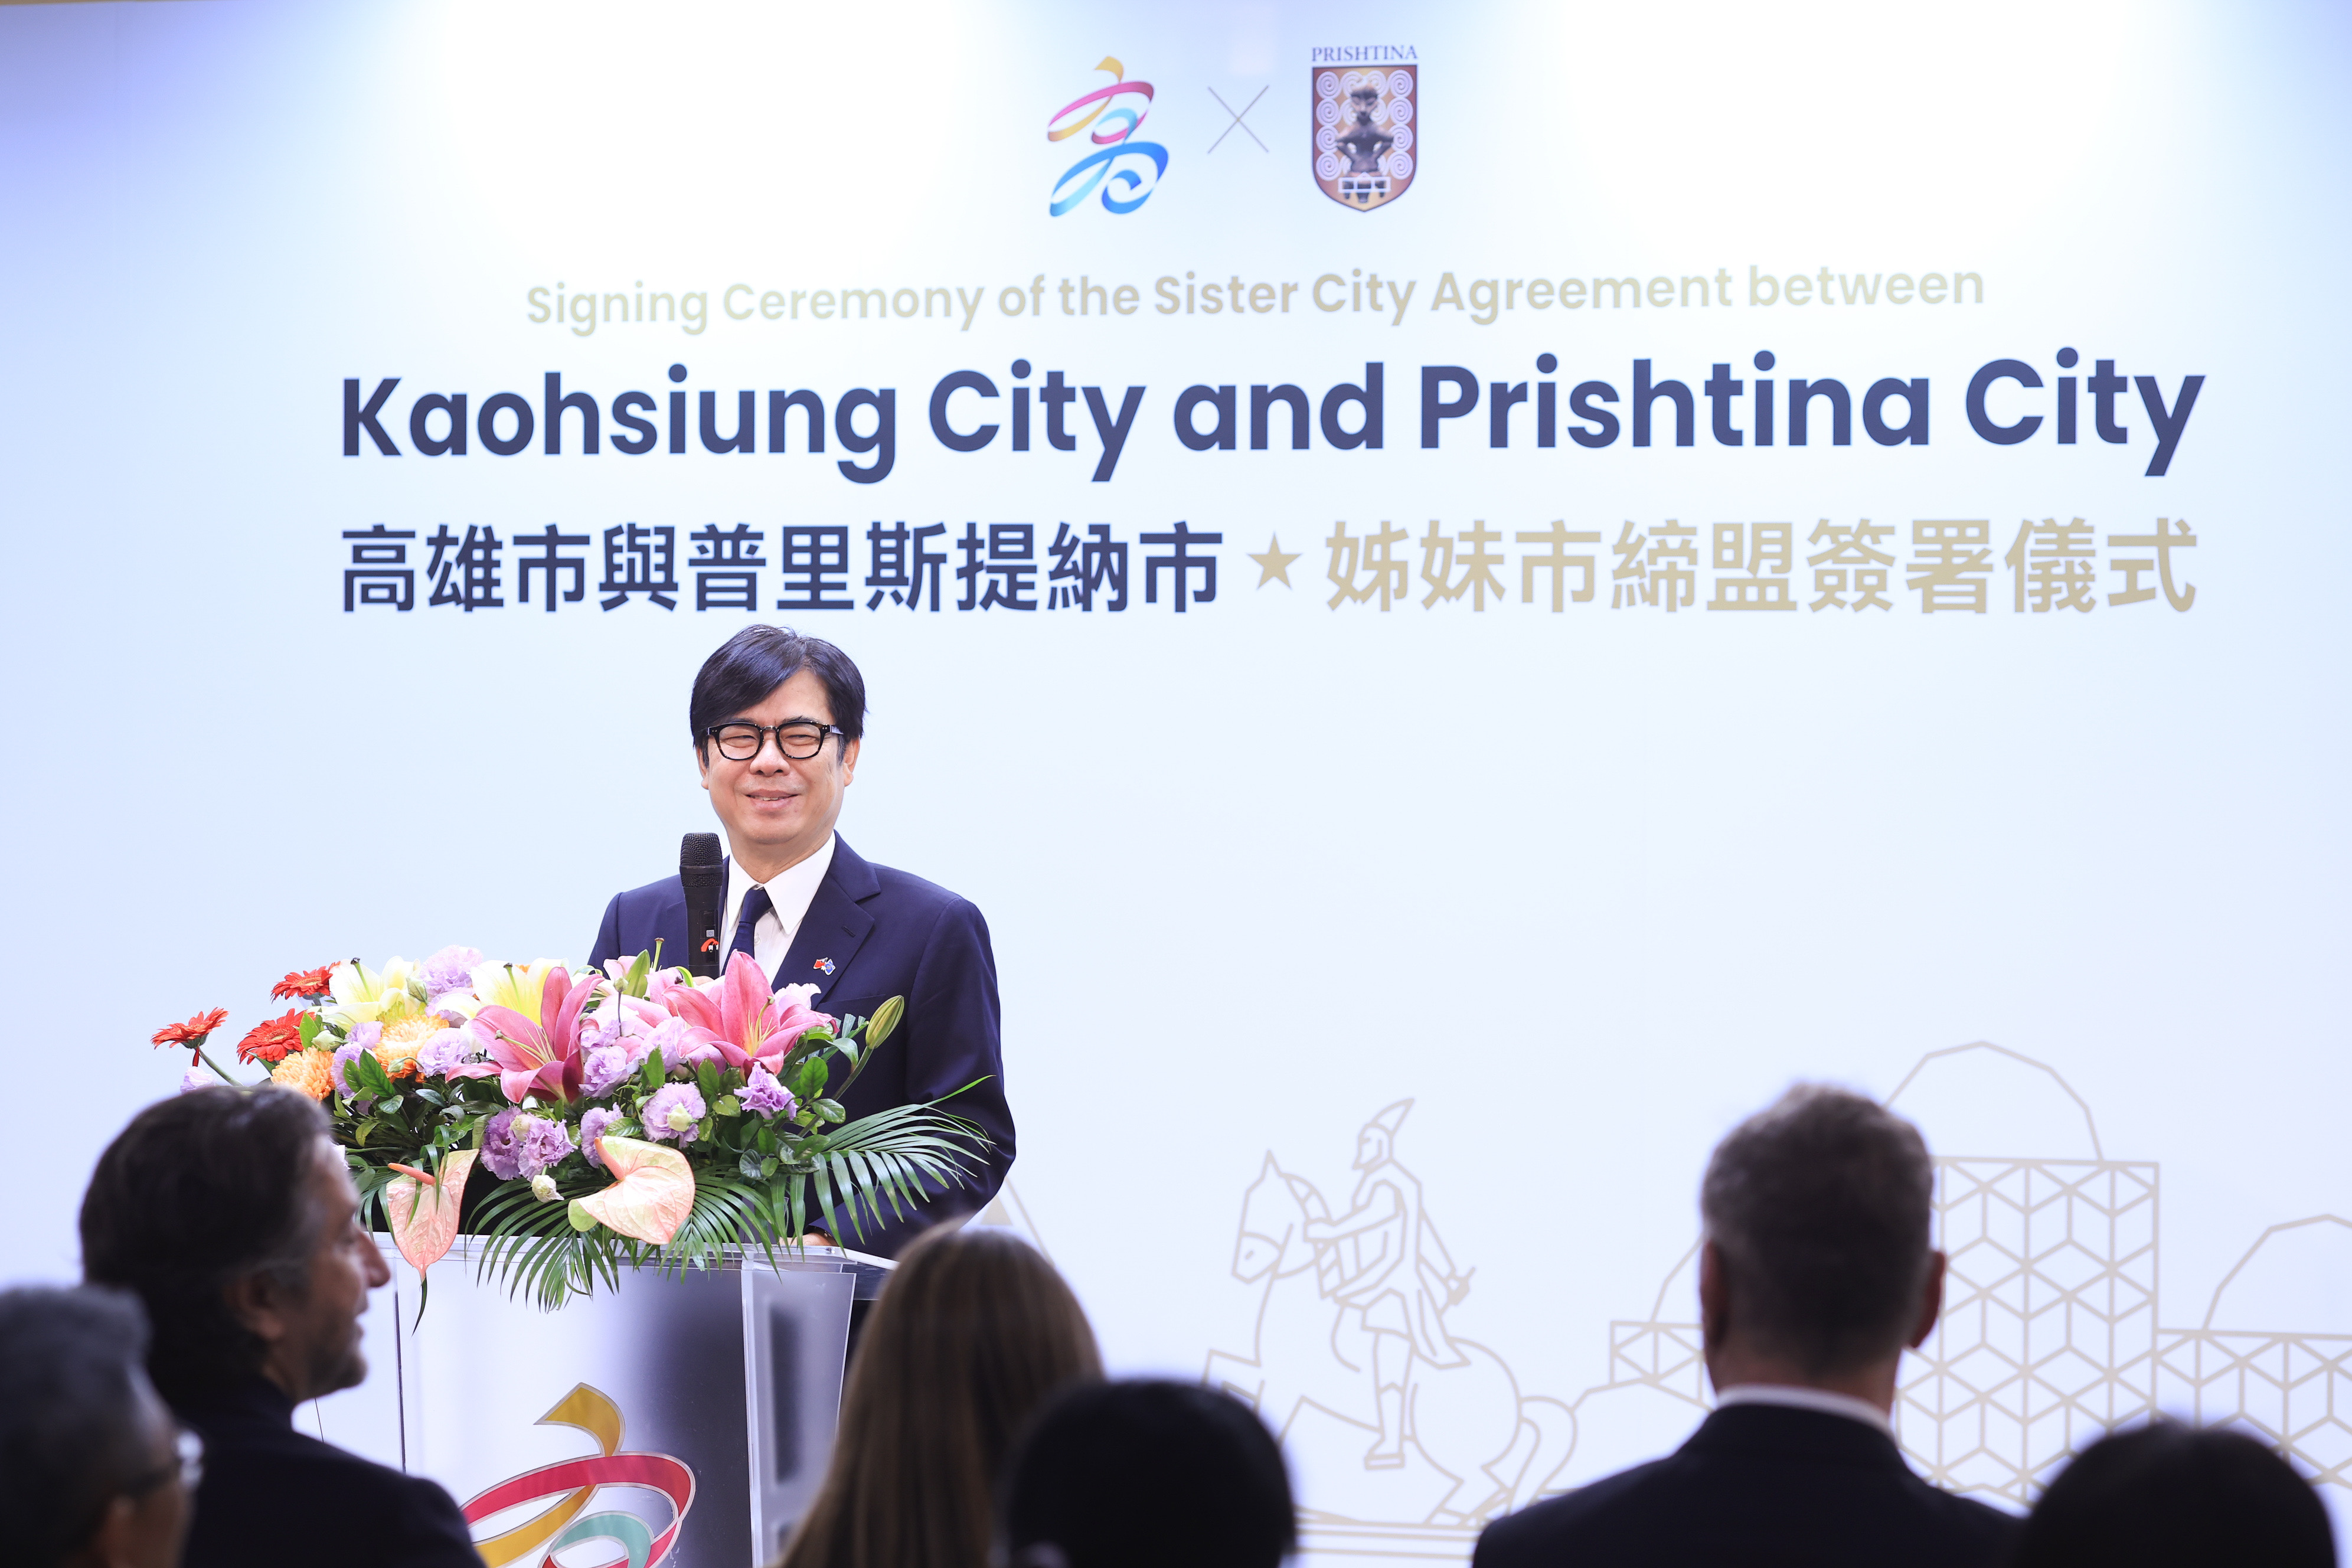 Mayor Chen of Kaohsiung City delivered his welcome remarks.